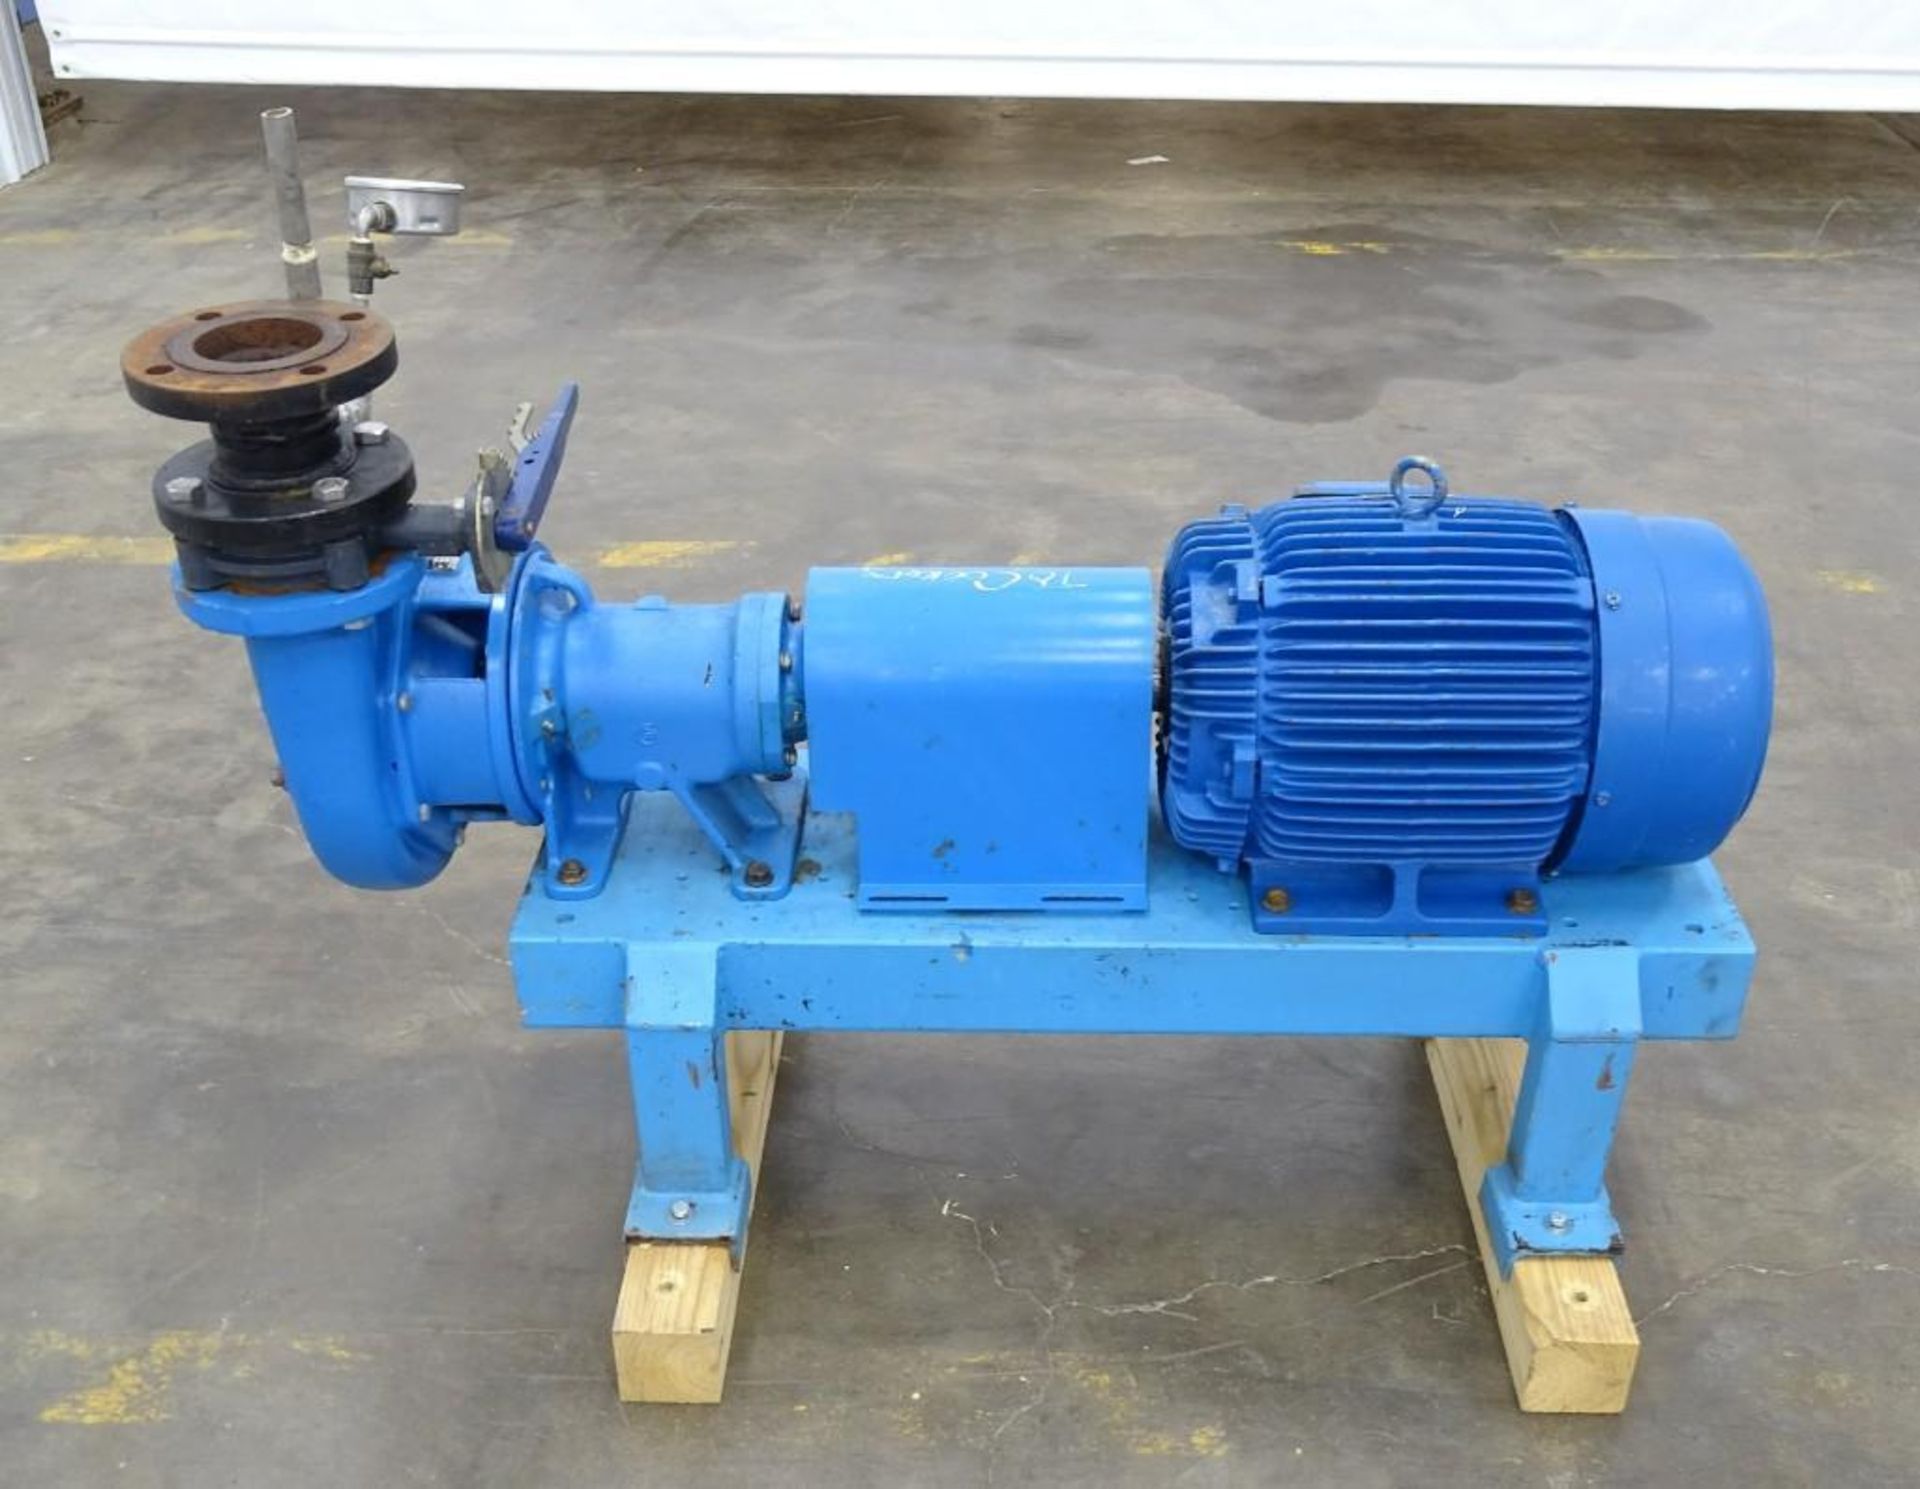 Goulds Centrifugal Pump with 15 HP Motor